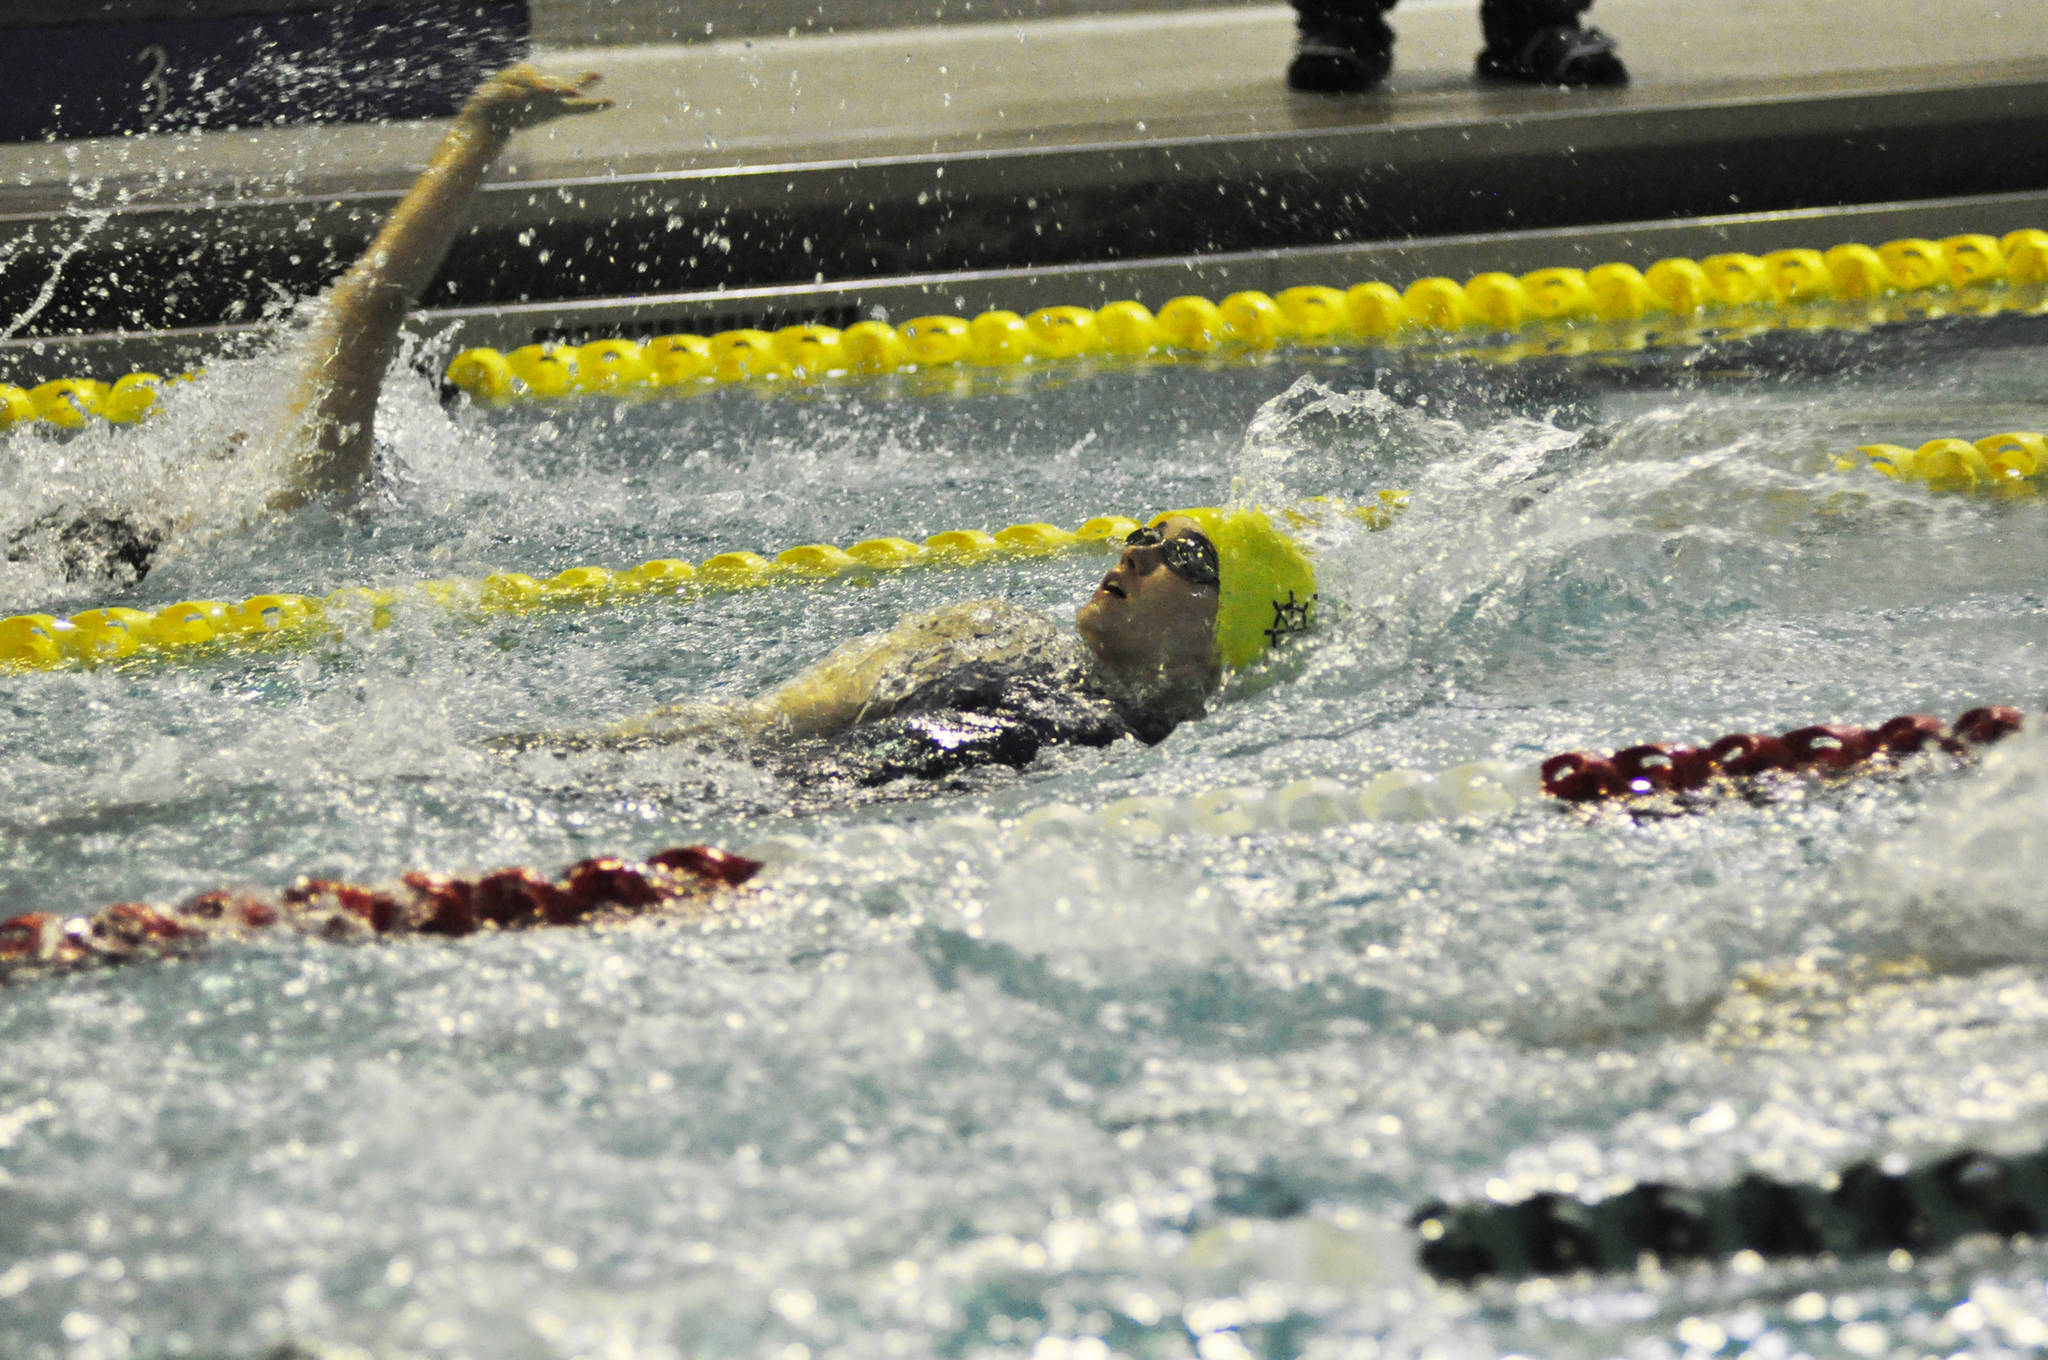 Senior Mariner swimmer Chloe Bechtol competes in the Region III Swimming and Diving Championships held Friday and Saturday, Oct. 27-28, 2017 in Palmer, Alaska. (Photo submitted)